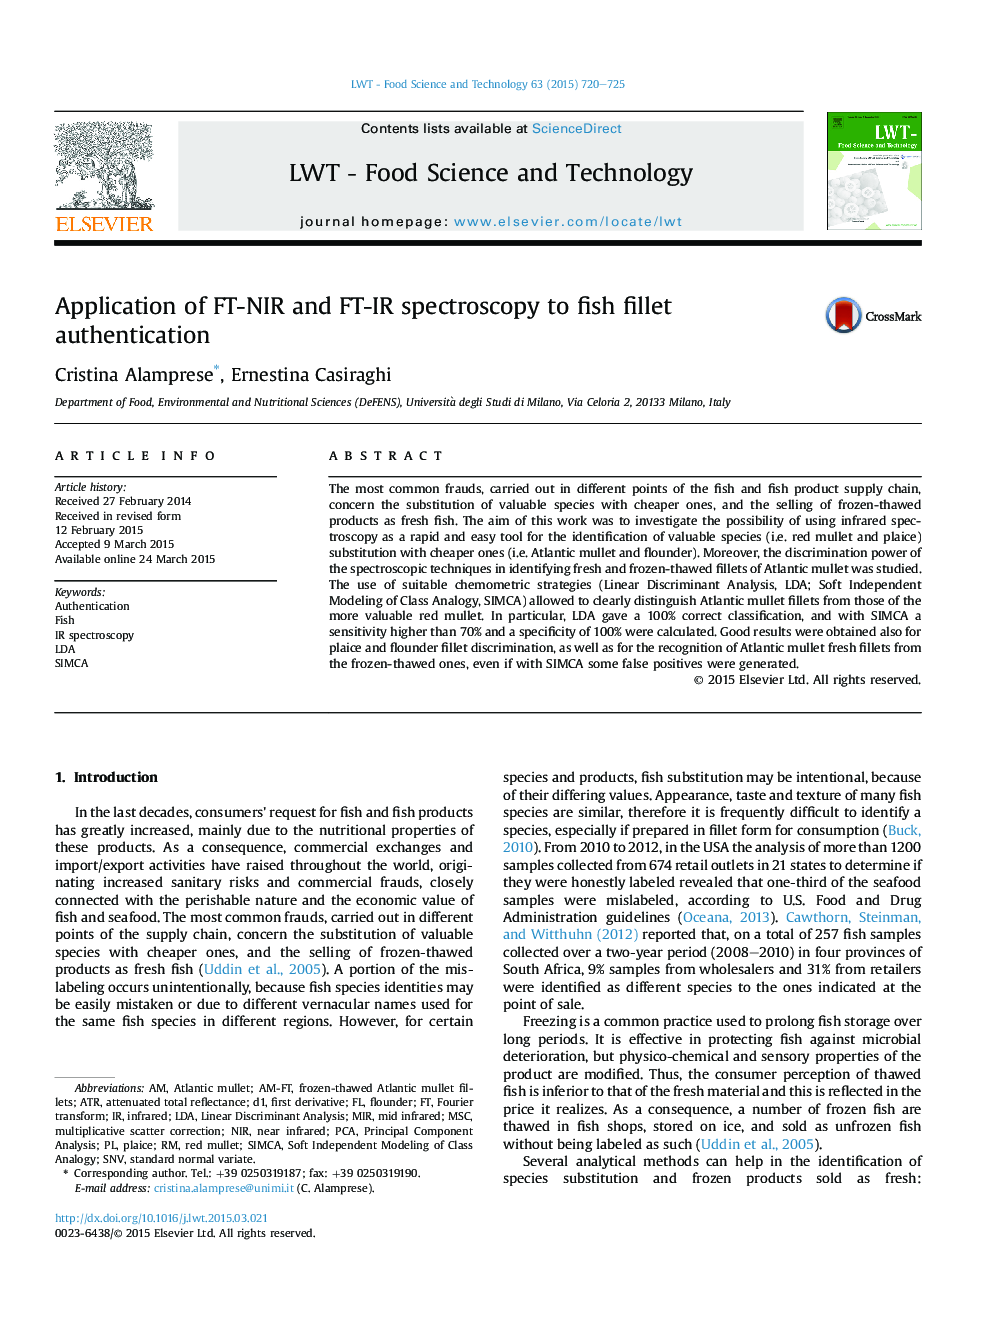 Application of FT-NIR and FT-IR spectroscopy to fish fillet authentication